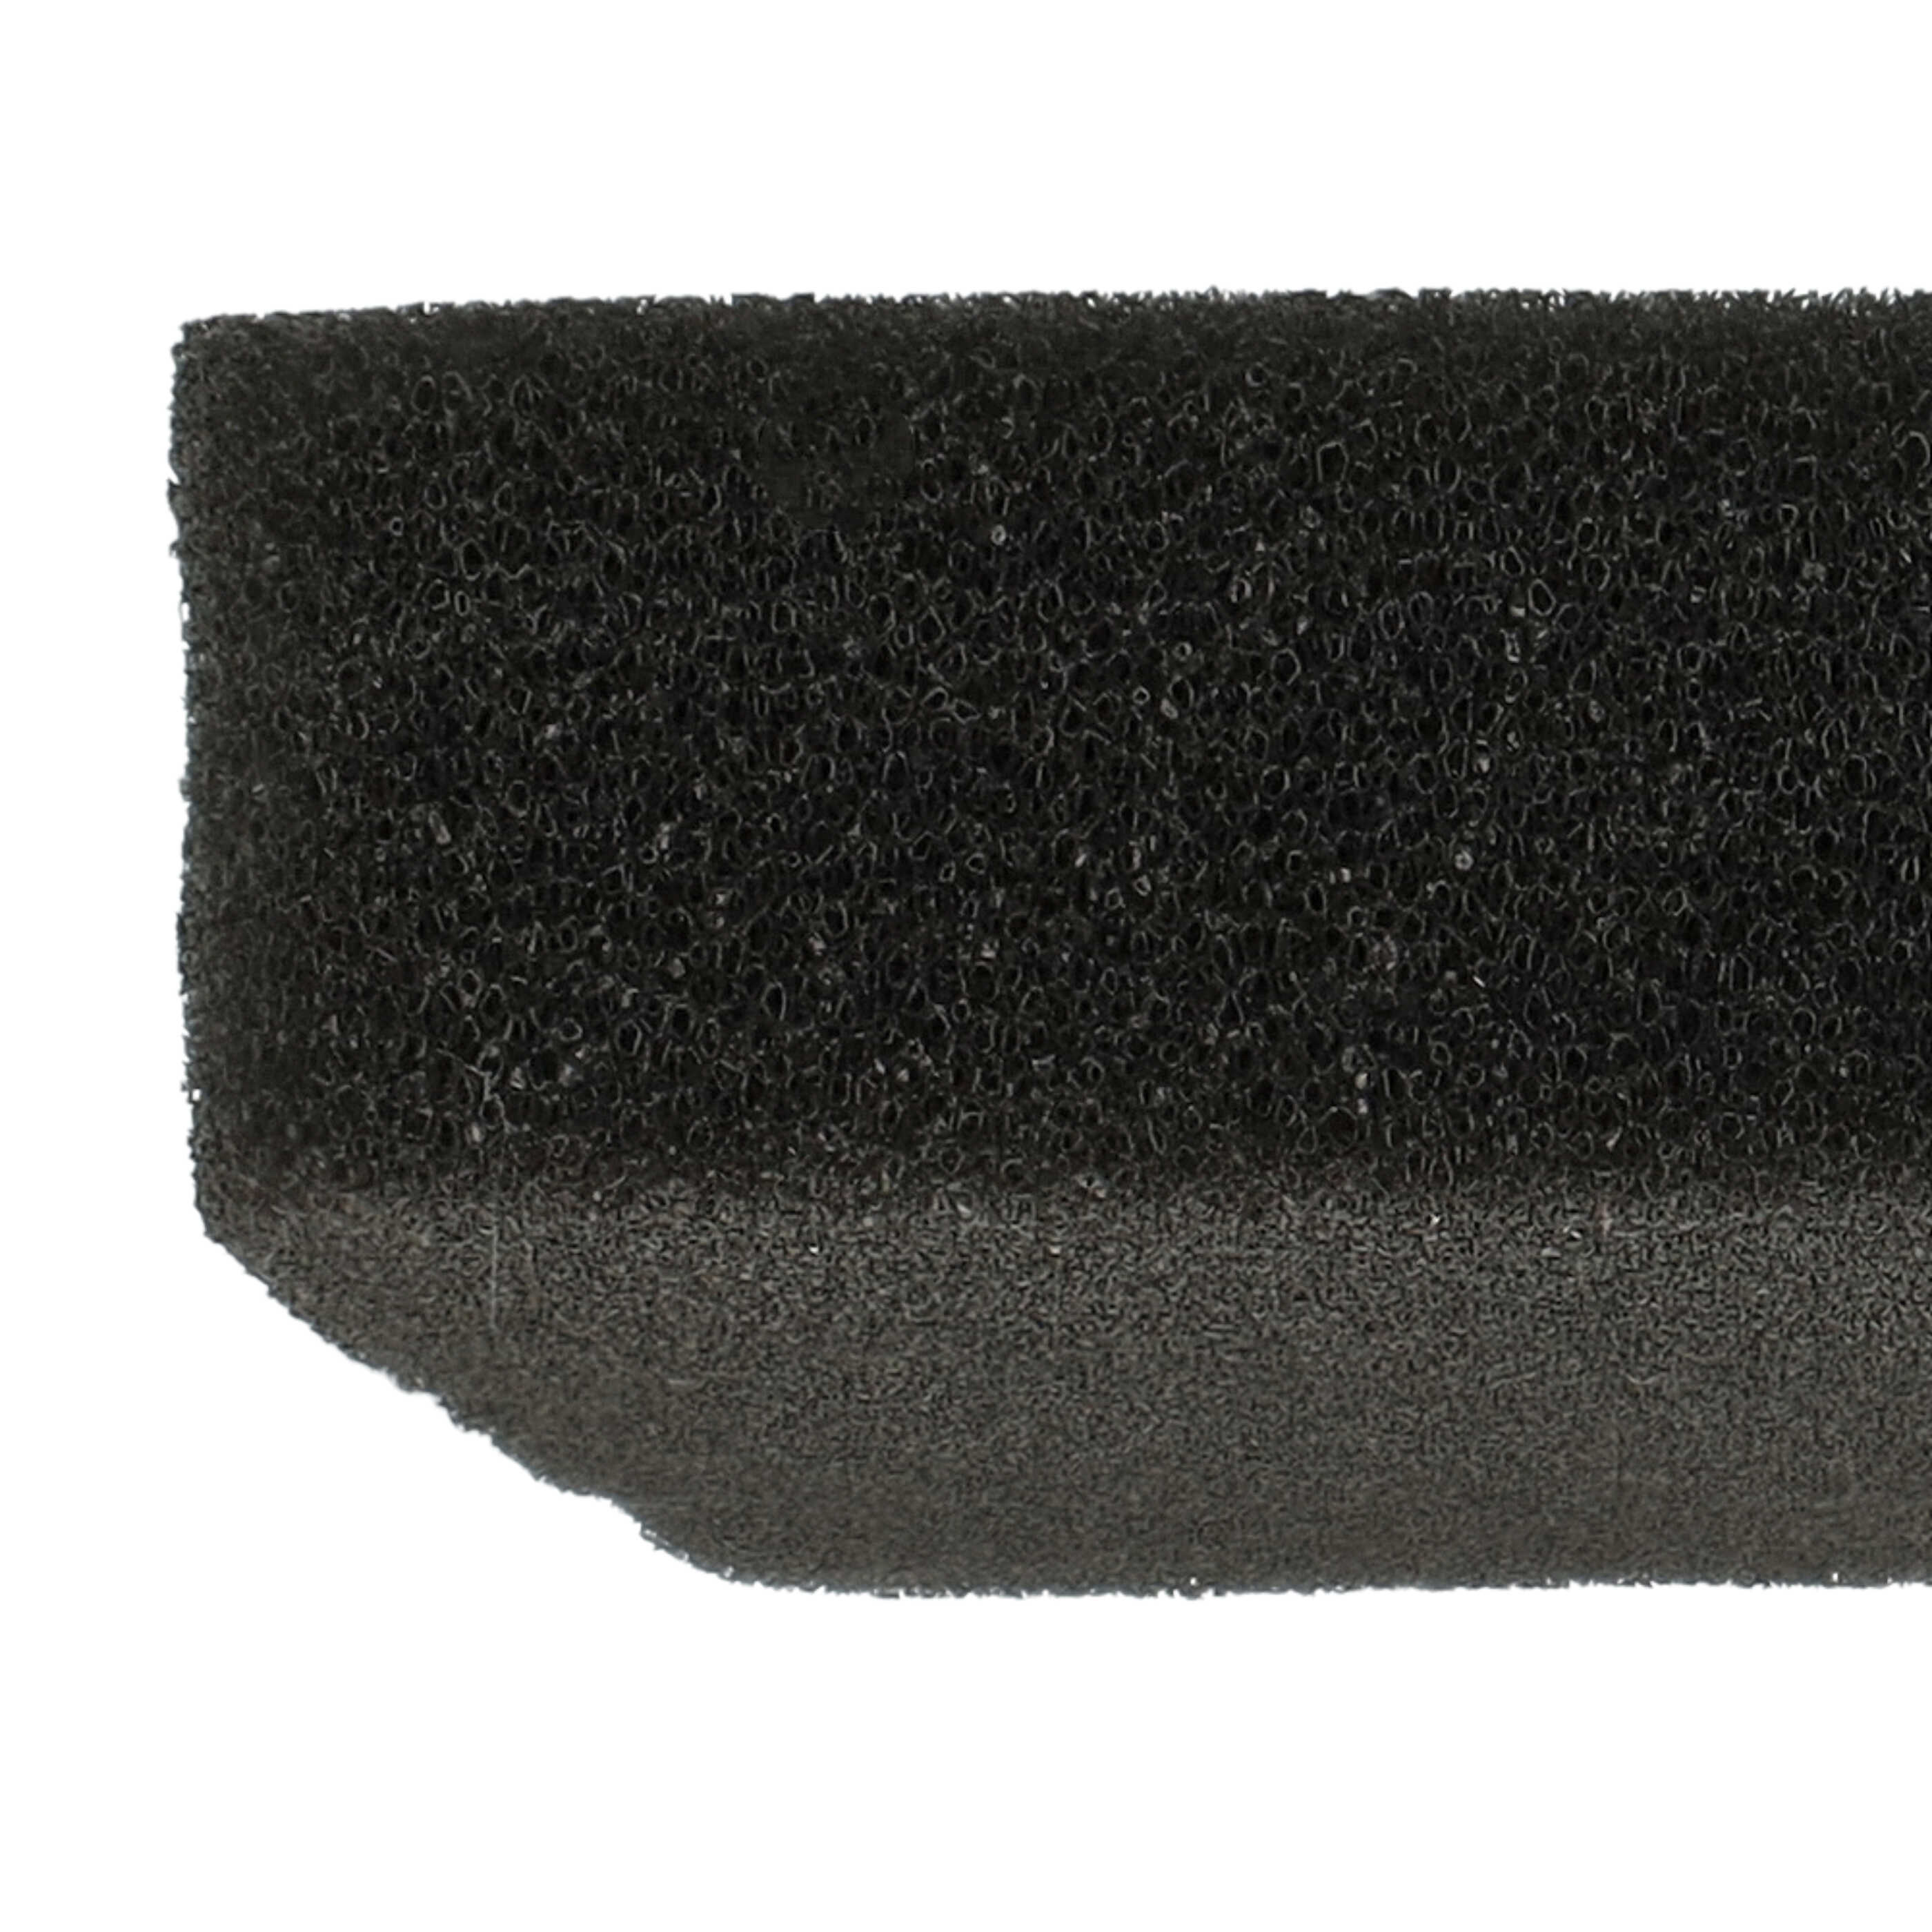 1x foam filter replaces Rowenta RS-RT4229 for Rowenta Vacuum Cleaner